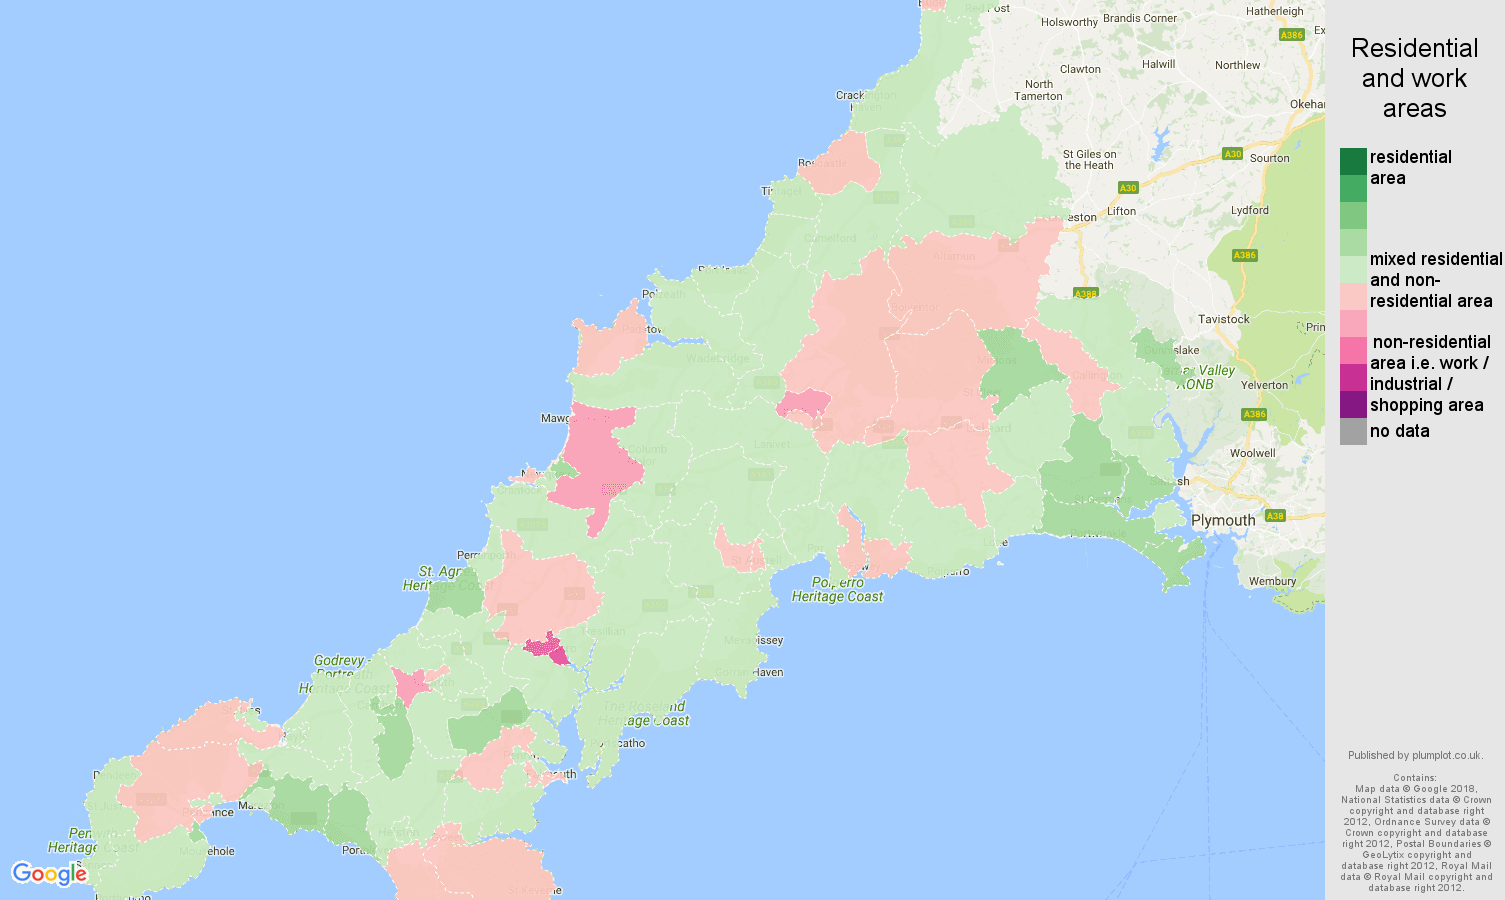 Cornwall residential areas map